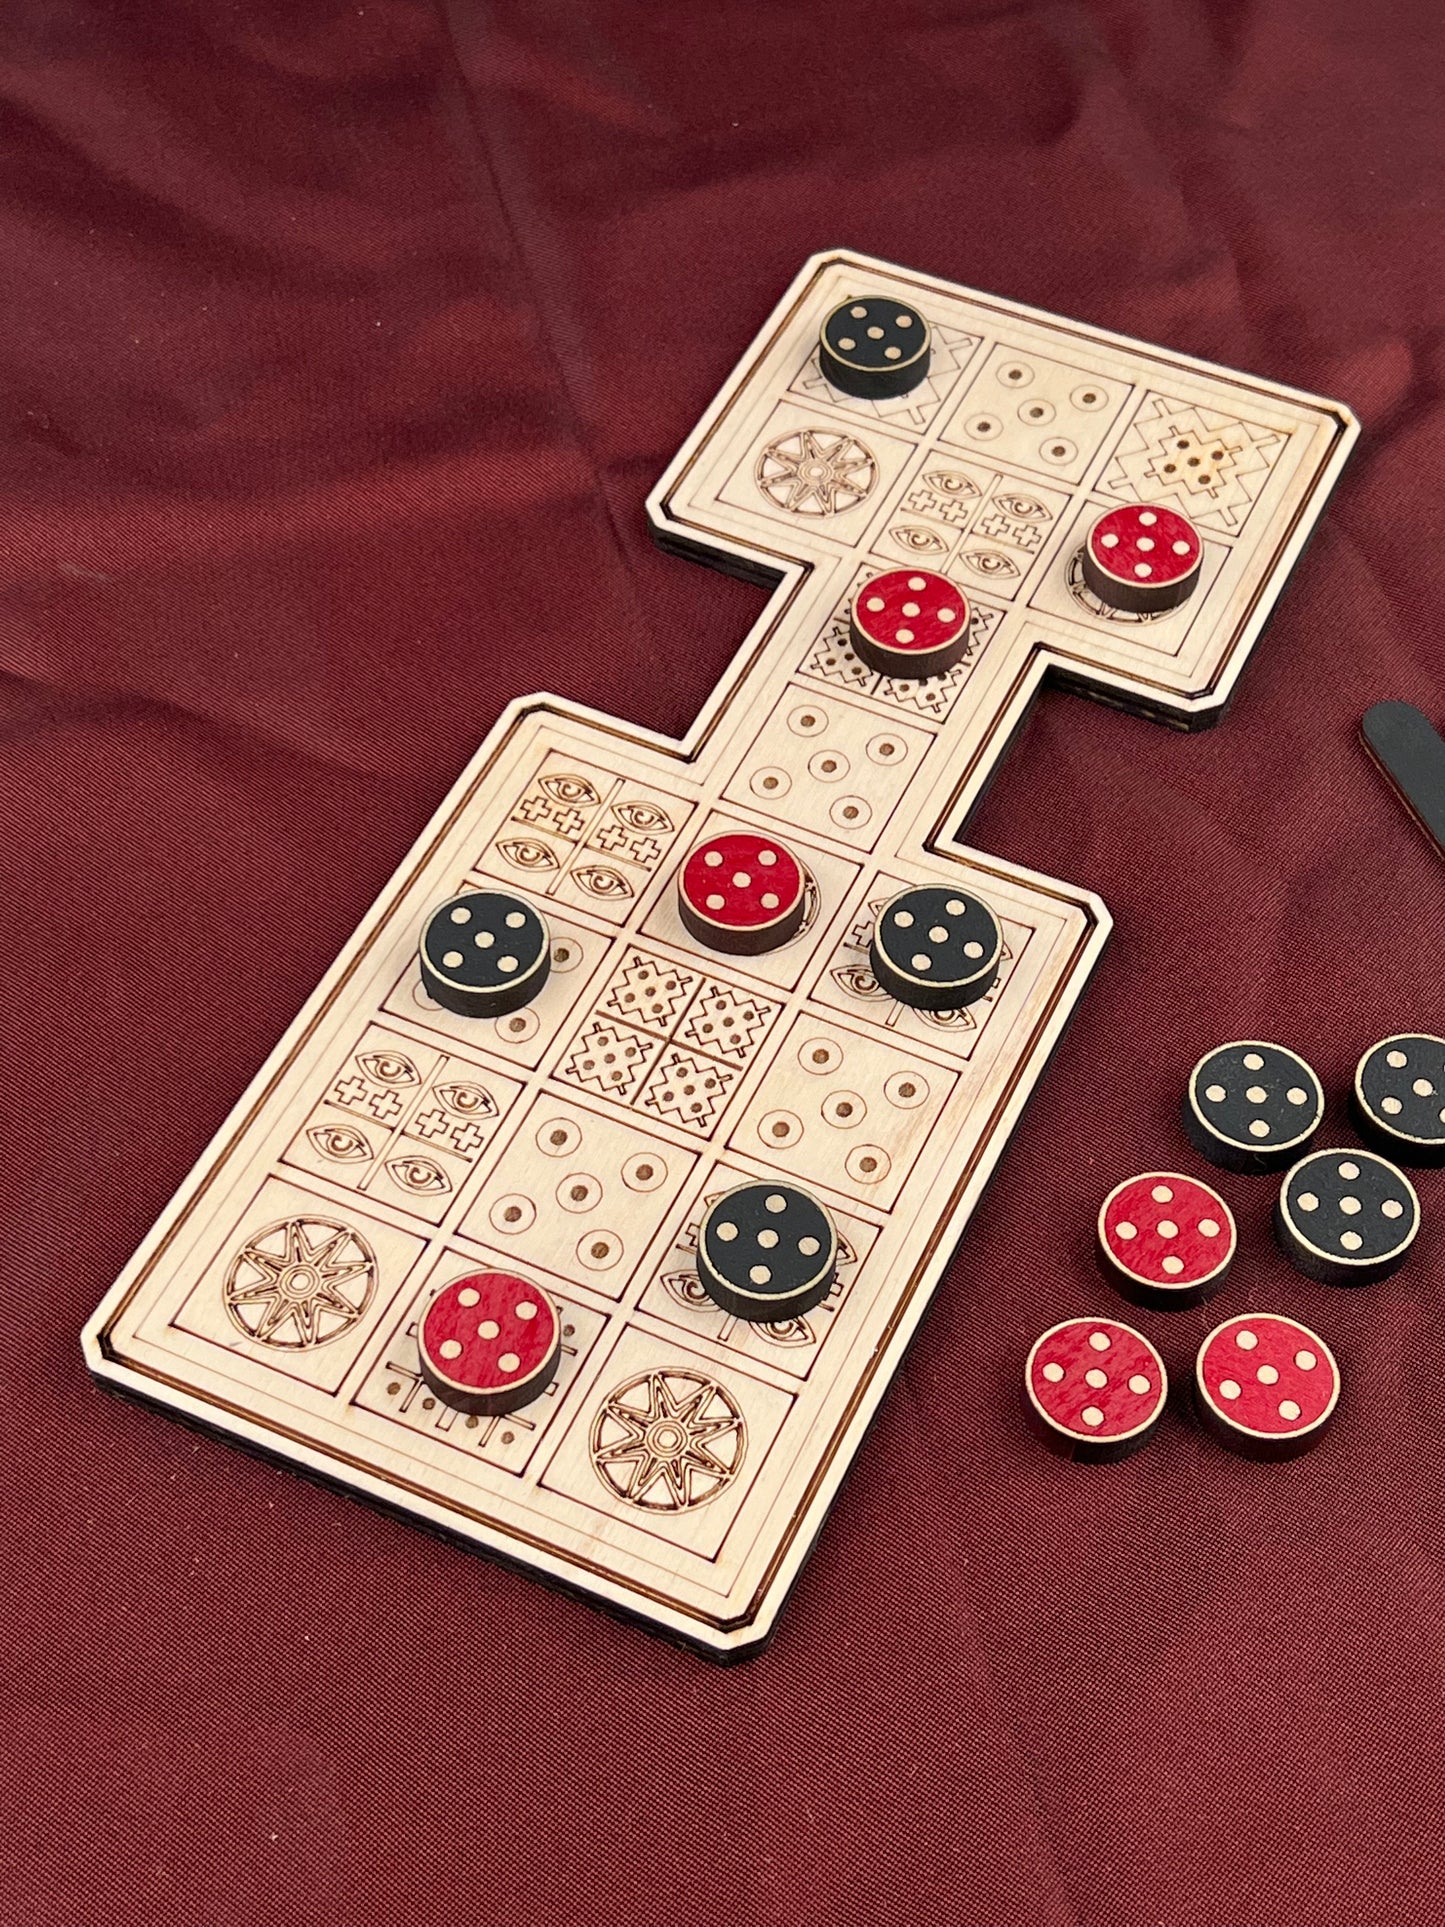 The Ancient Game of UR - A beautiful, Royal Game from Ancient Mesopotamia. Travel Edition.